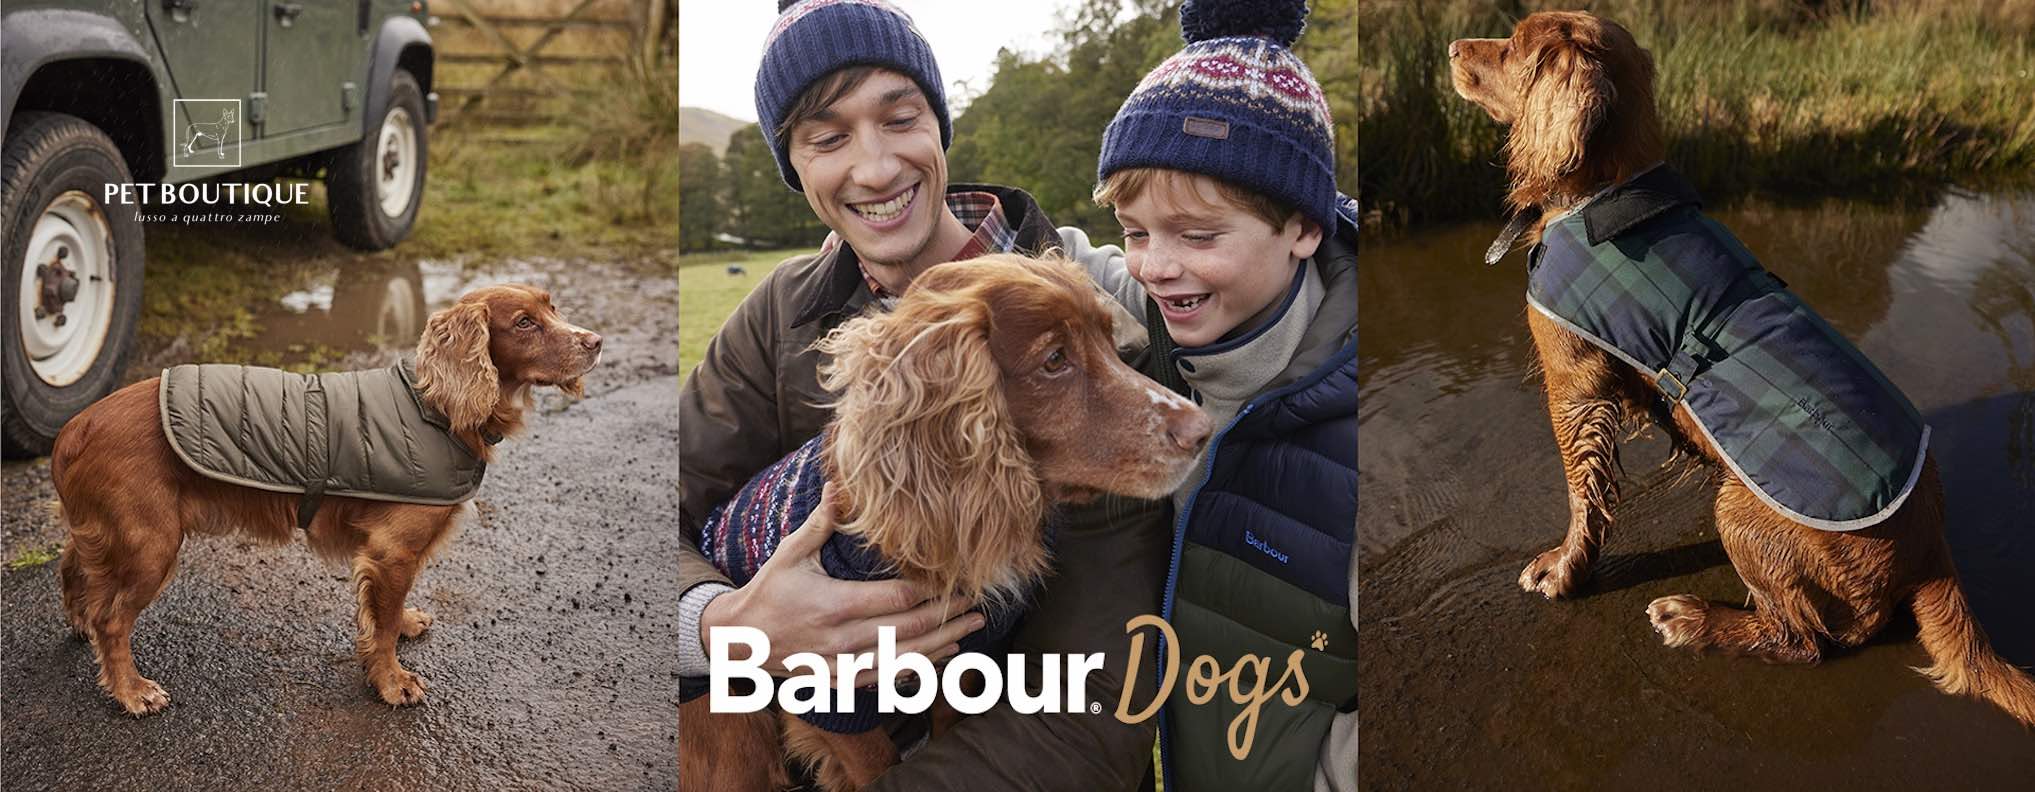 Brand banner barbour